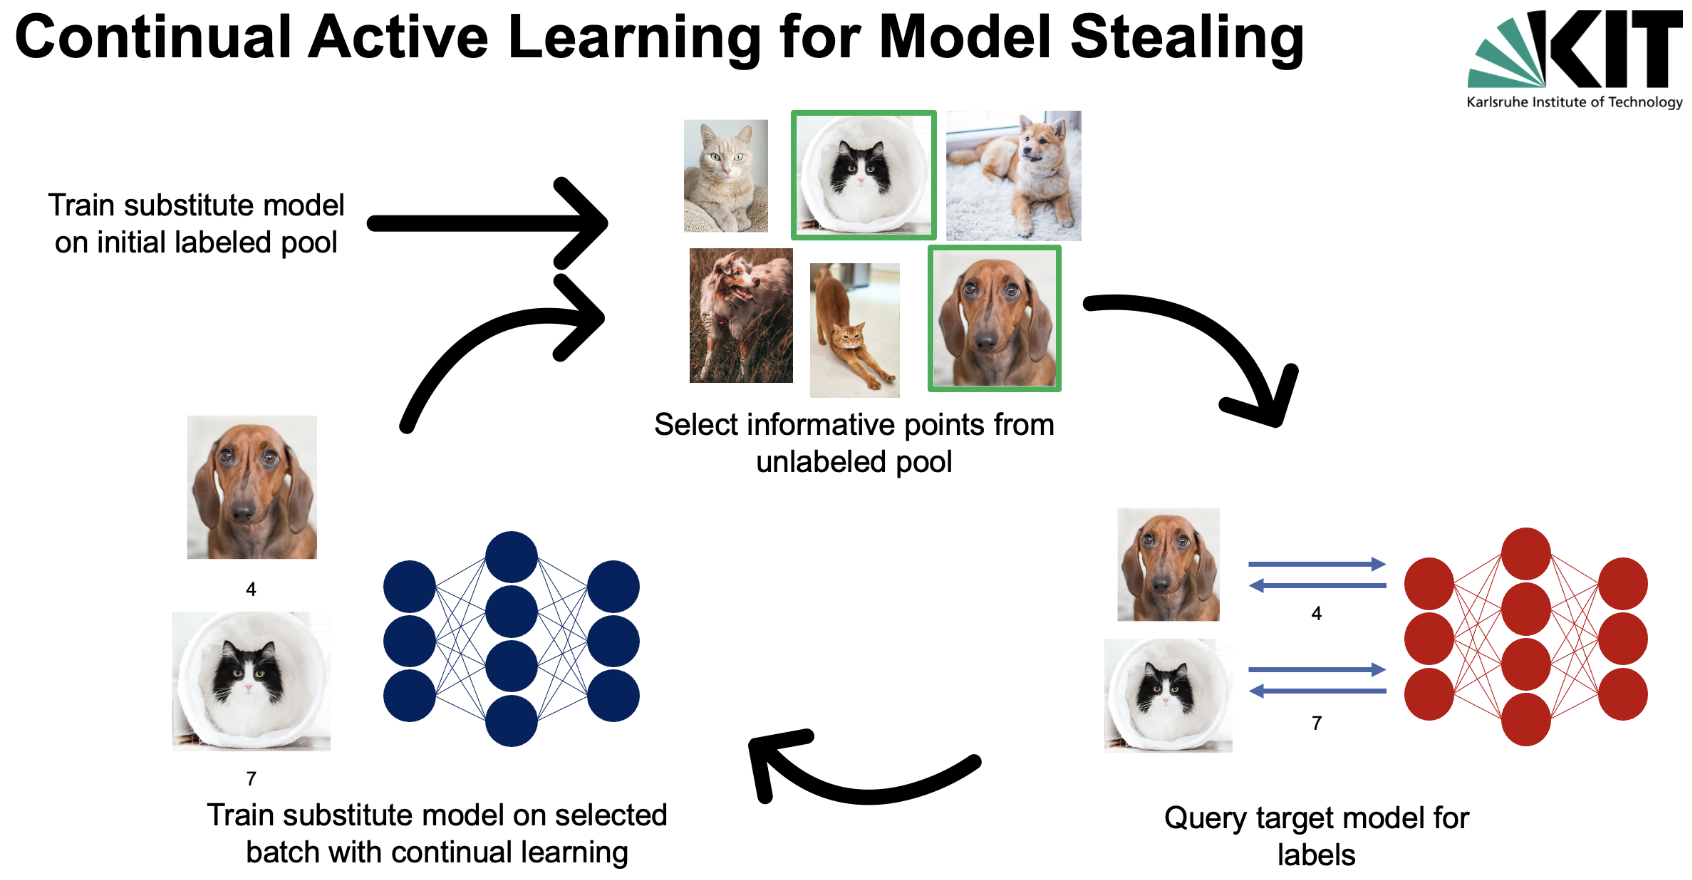 Workflow of Continual Active Learning for Model Stealing